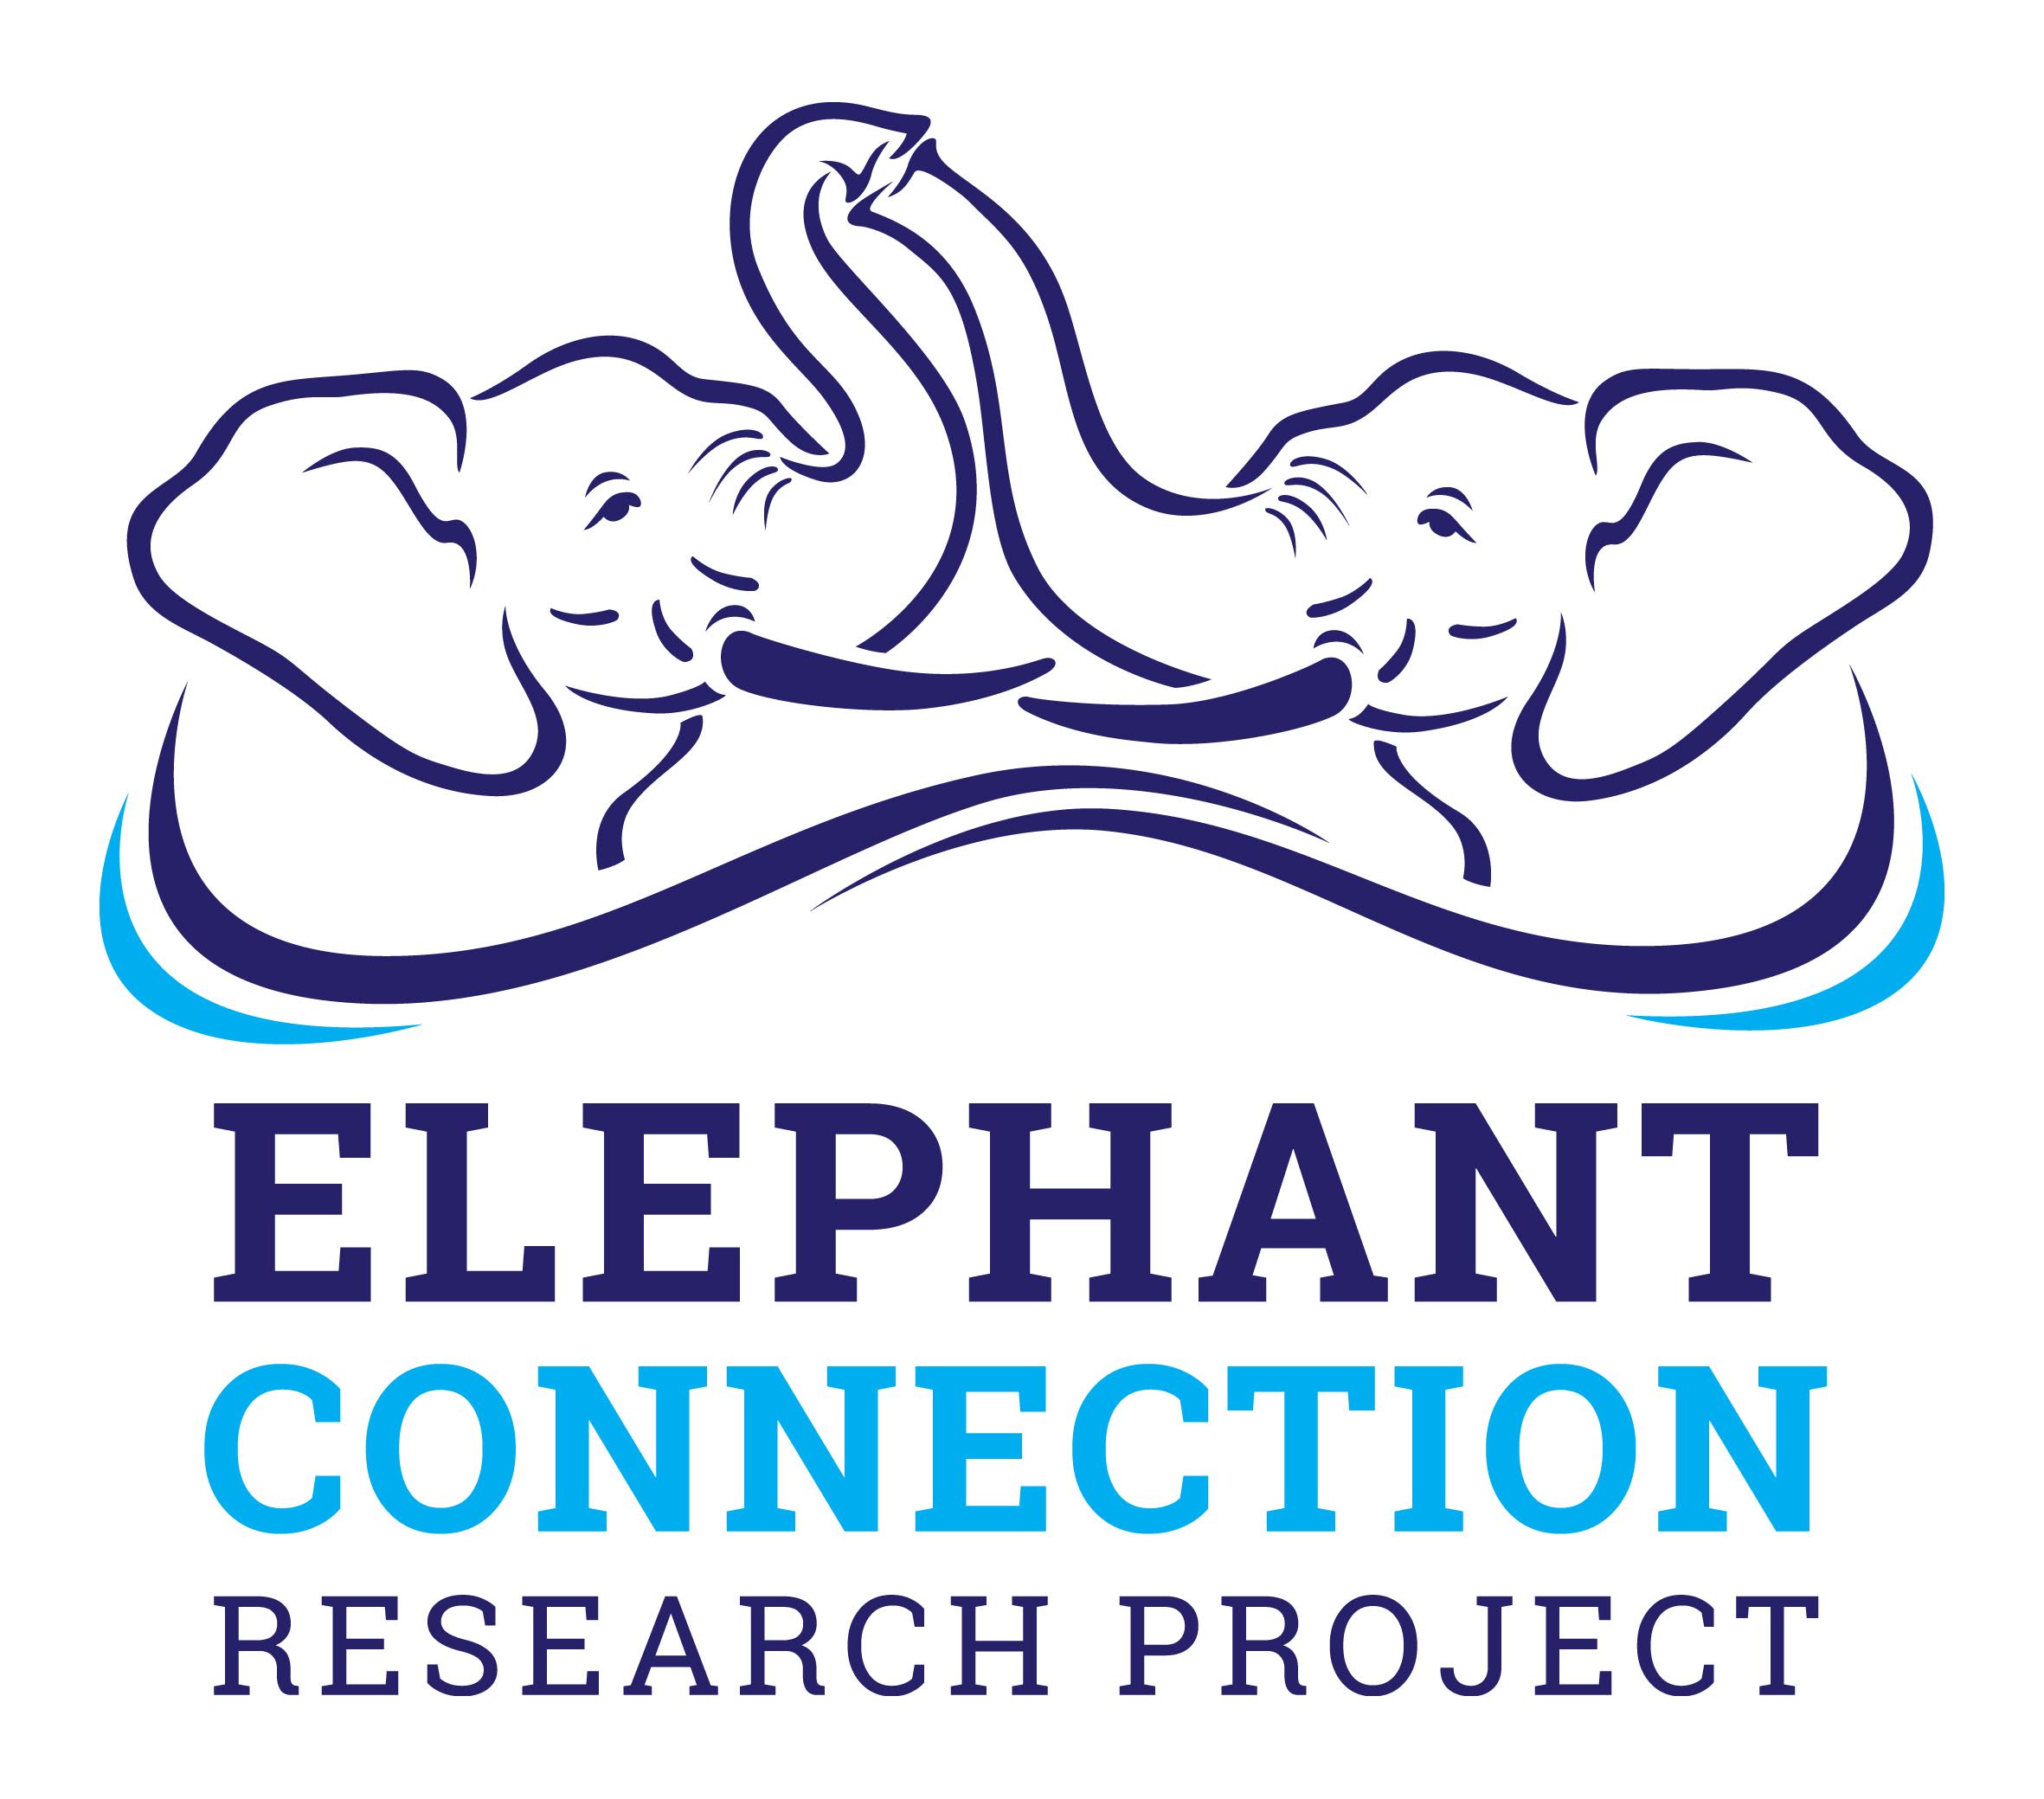 Elephant Connection Research Project logo